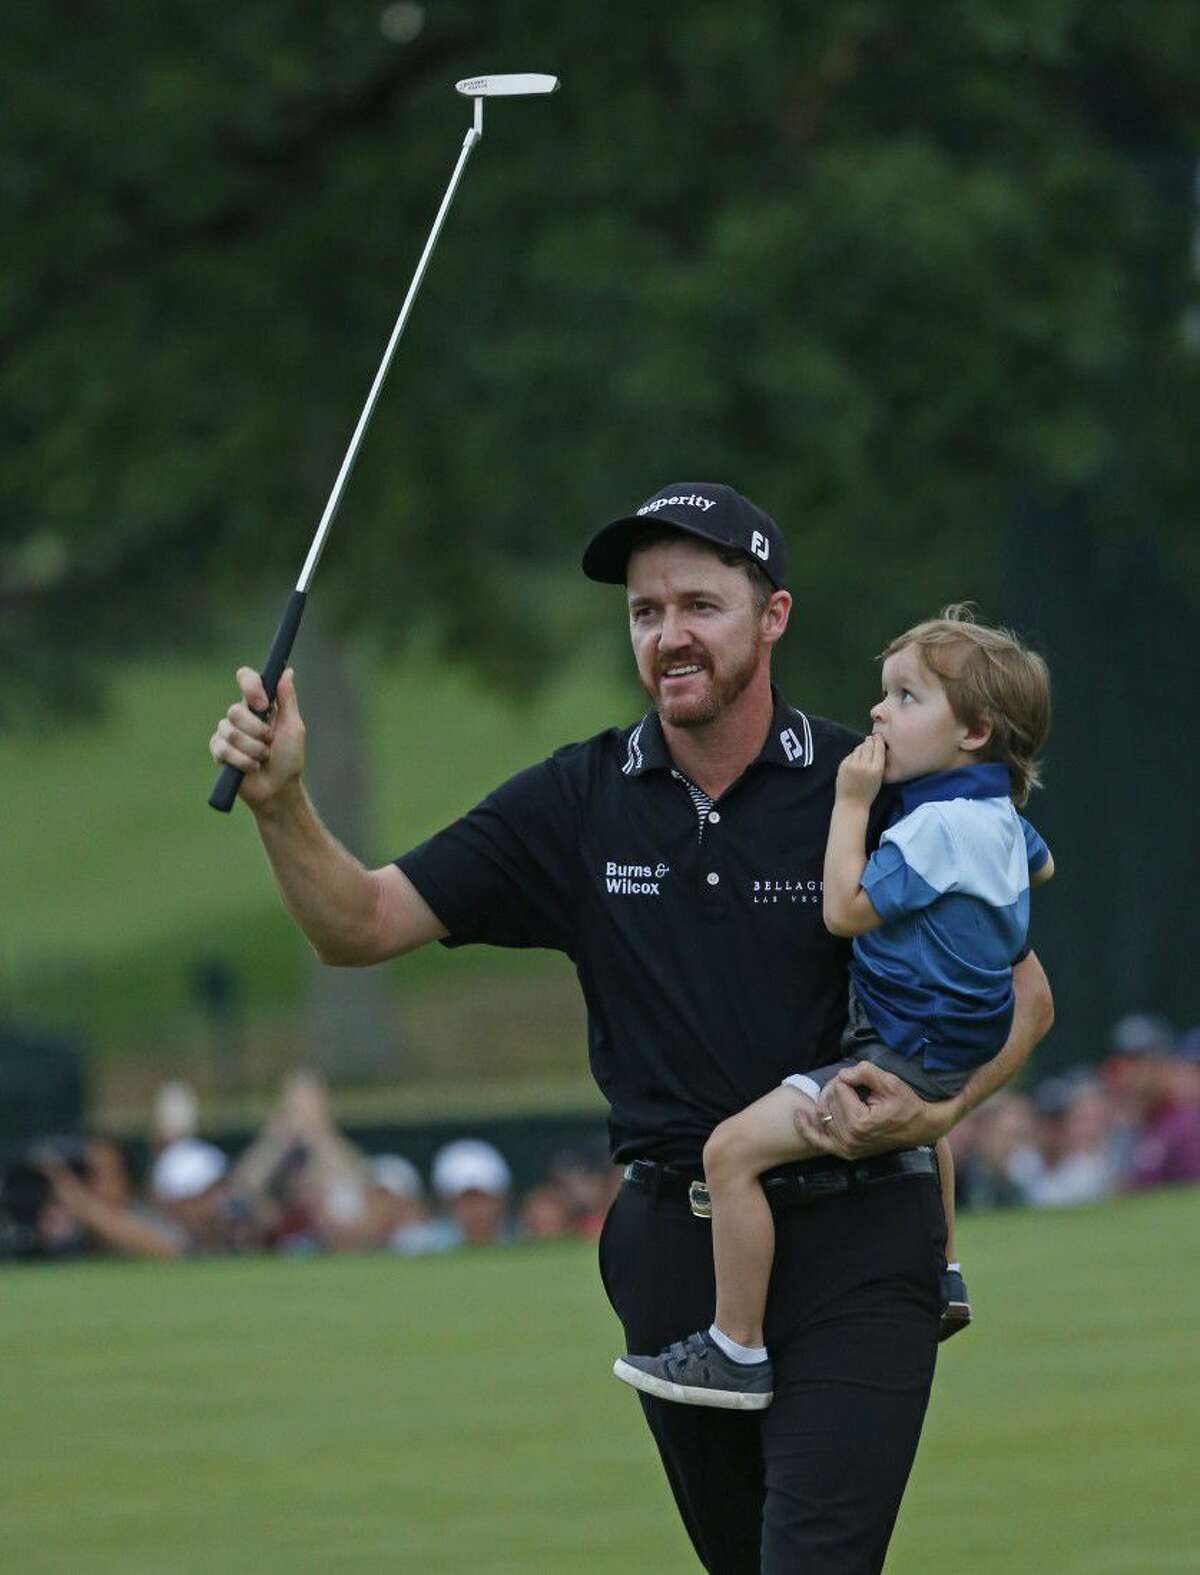 Jimmy Walker celebrates with his son Beckett after winning the PGA Championship golf tournament at Baltusrol Golf Club in Springfield, N.J., Sunday, July 31, 2016.